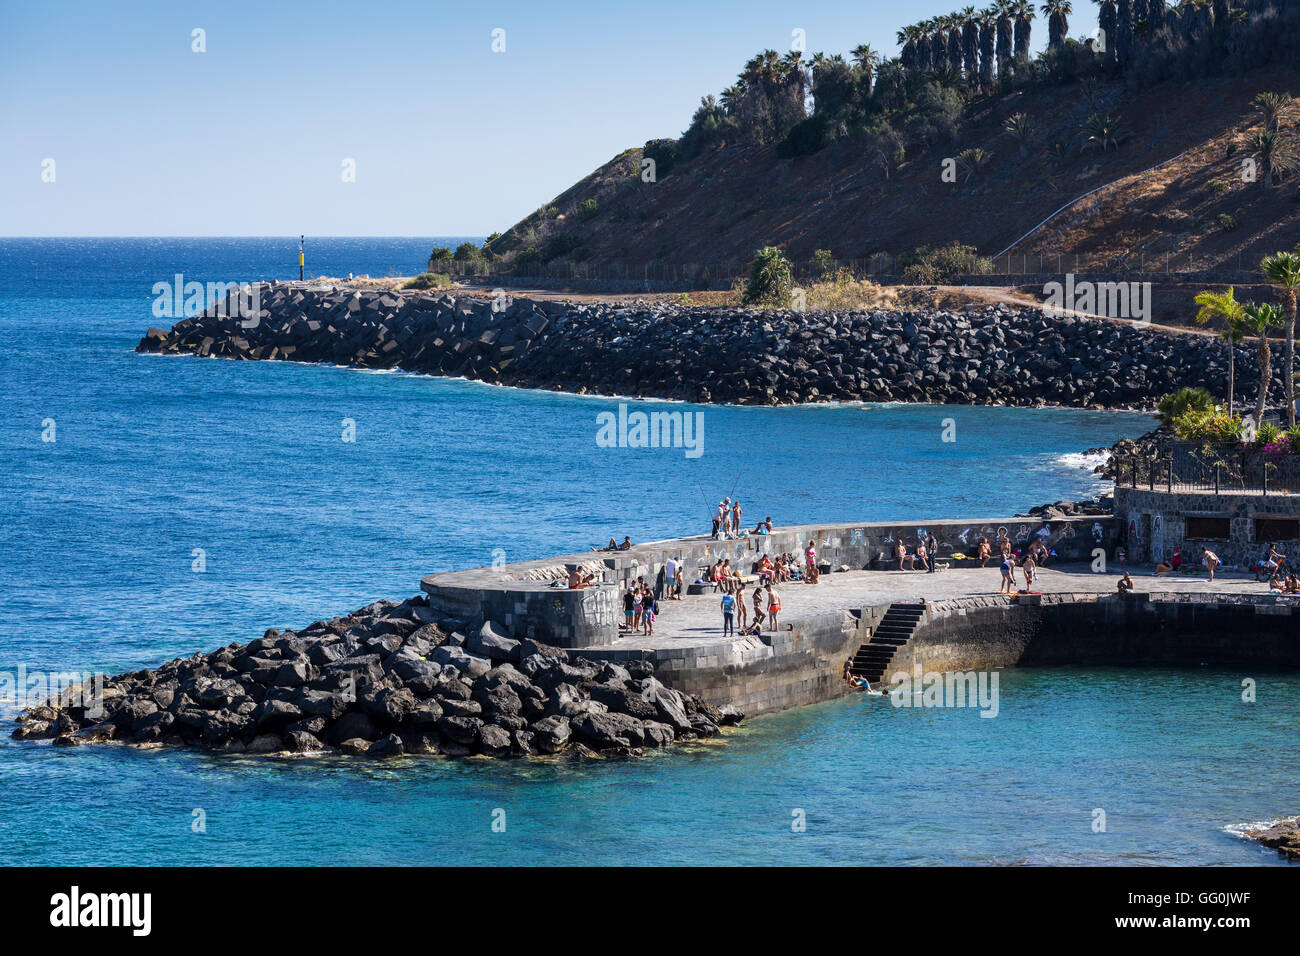 Swimmers at the small quay next to the Parque Maritimo in Santa Cruz, Tenerife, Canary Islands, Spain Stock Photo